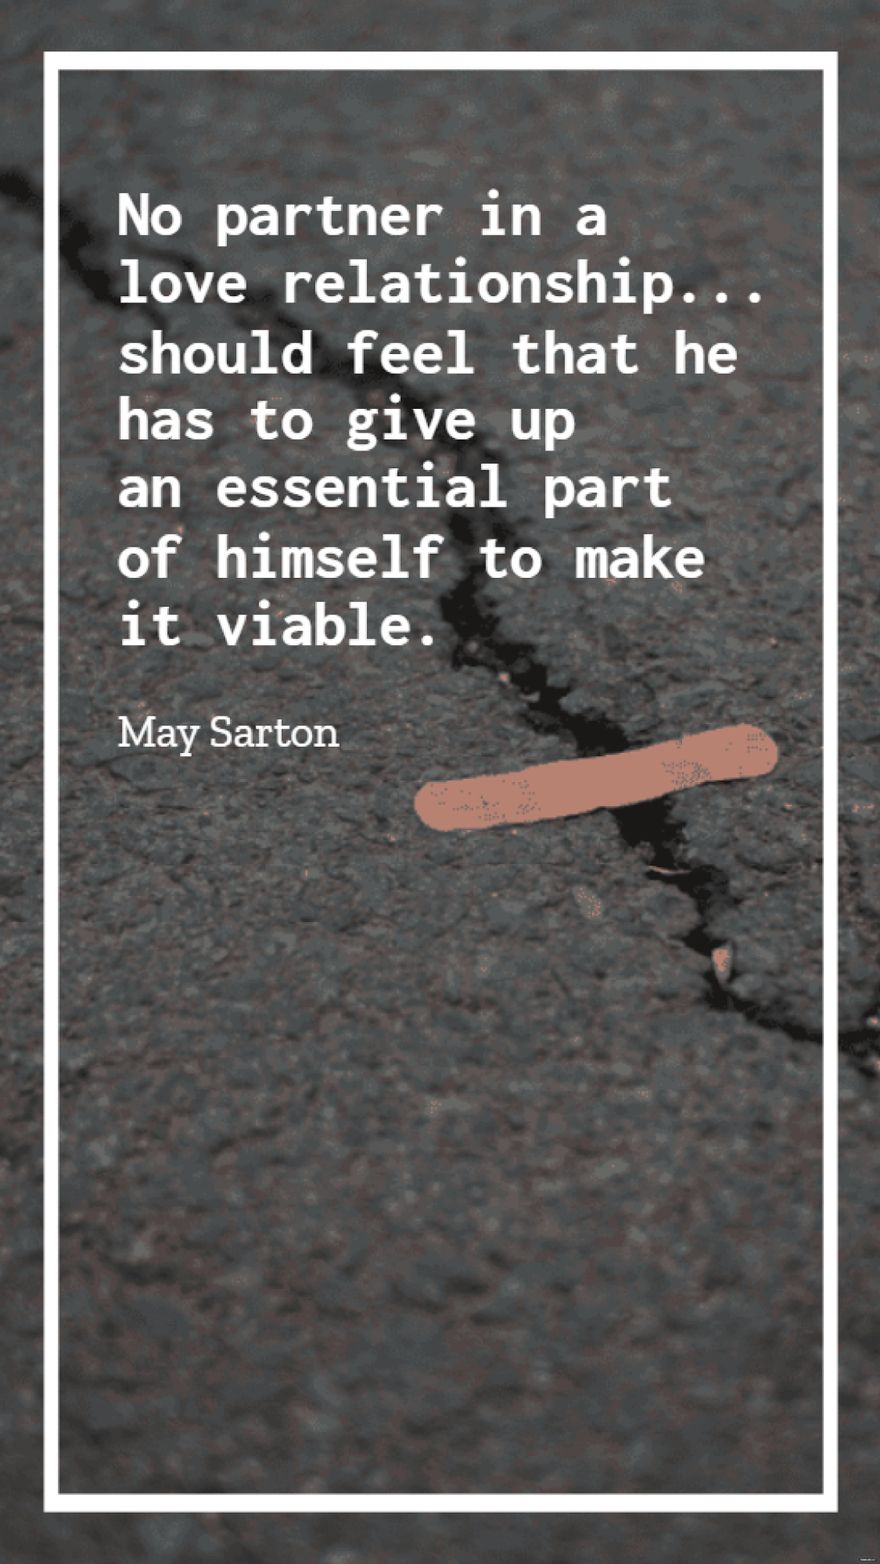 May Sarton - No partner in a love relationship... should feel that he has to give up an essential part of himself to make it viable.